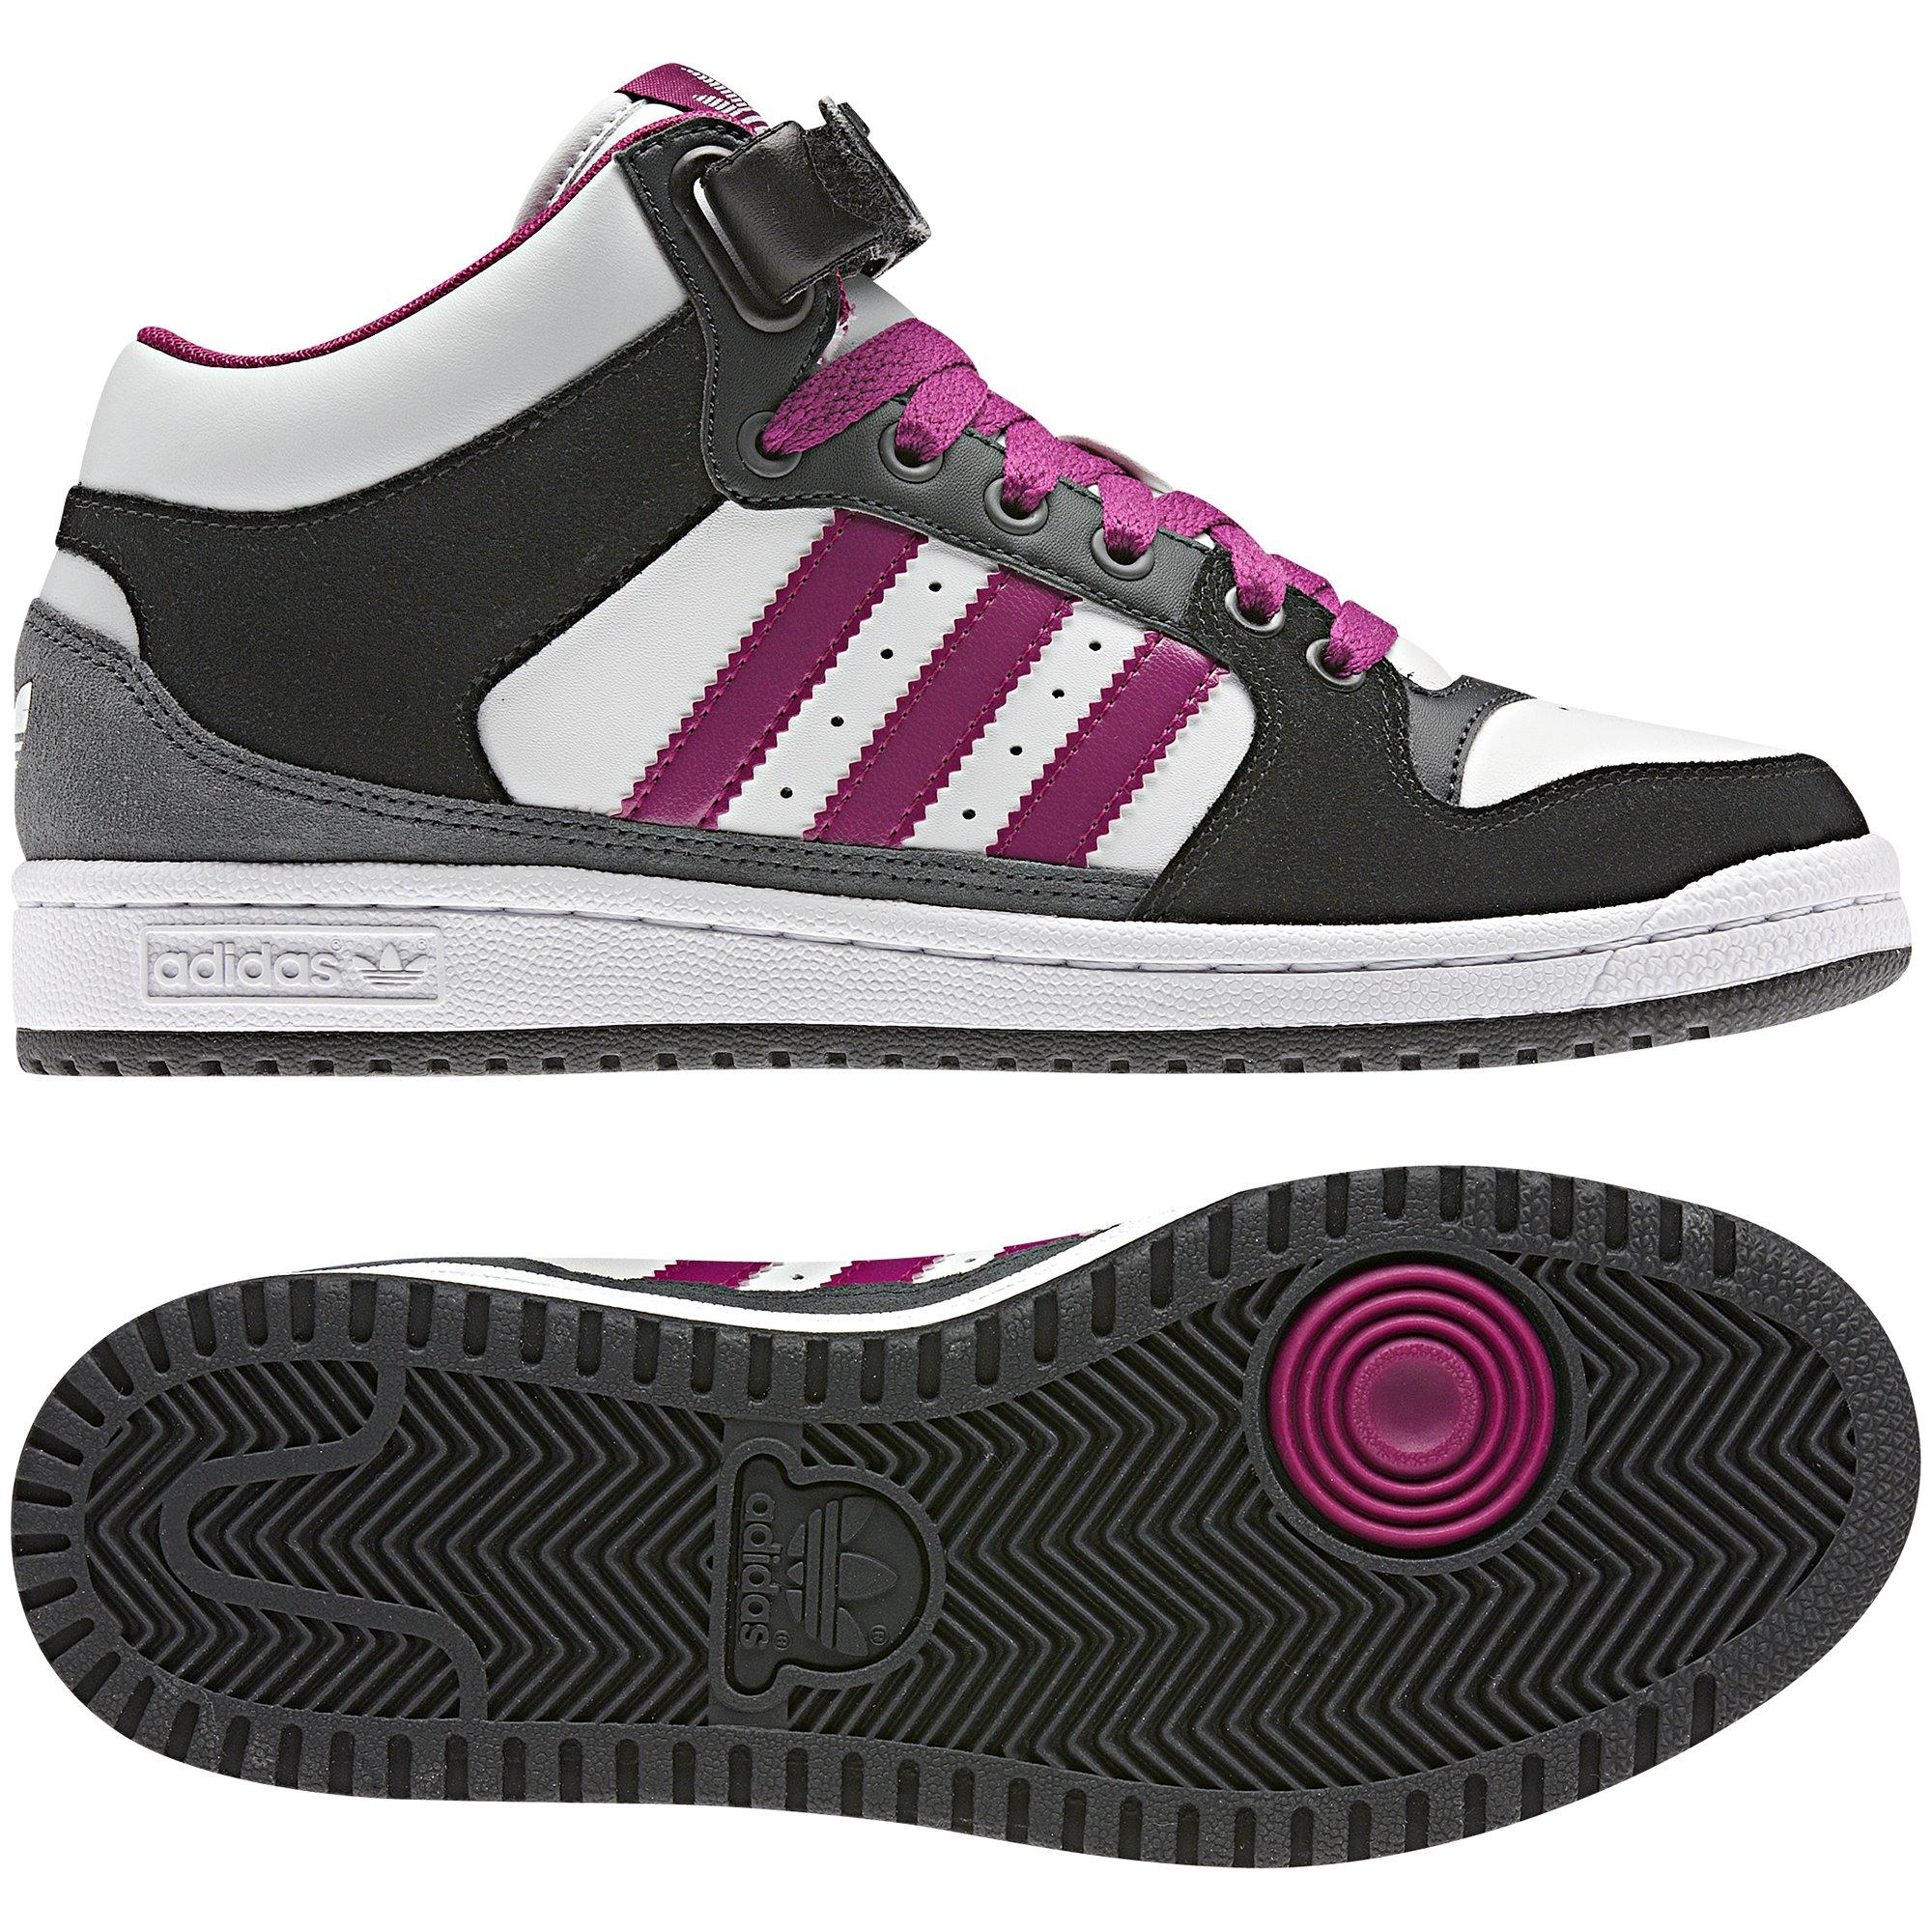 Foto adidas Decade Mid Shoes Mujer